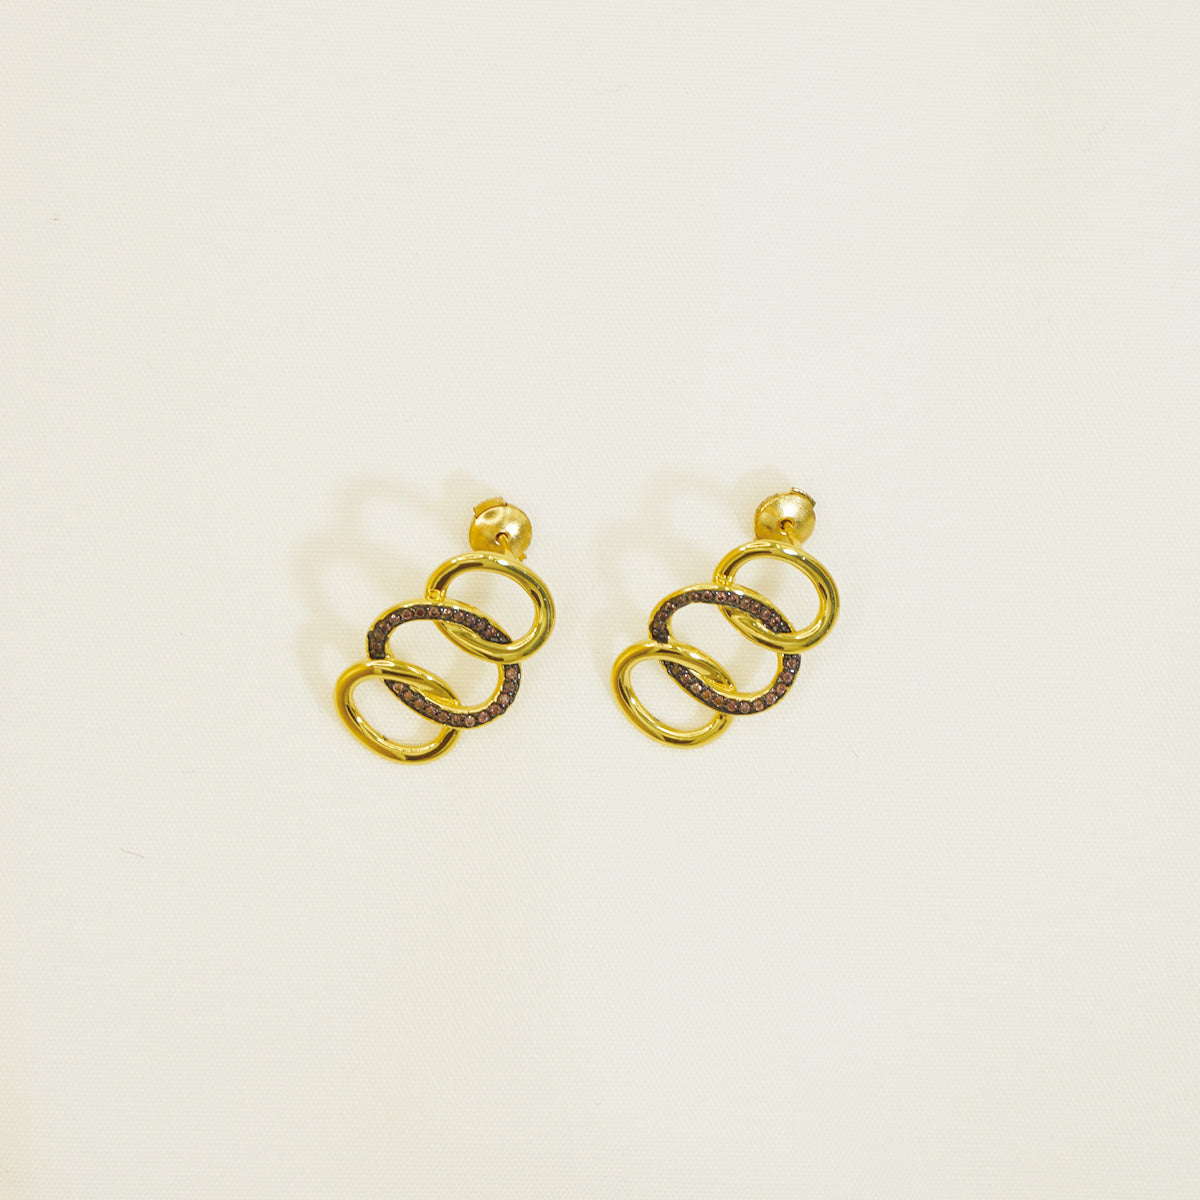 Gold Hammered Triple Hoop Earrings With Brown Stones for Women